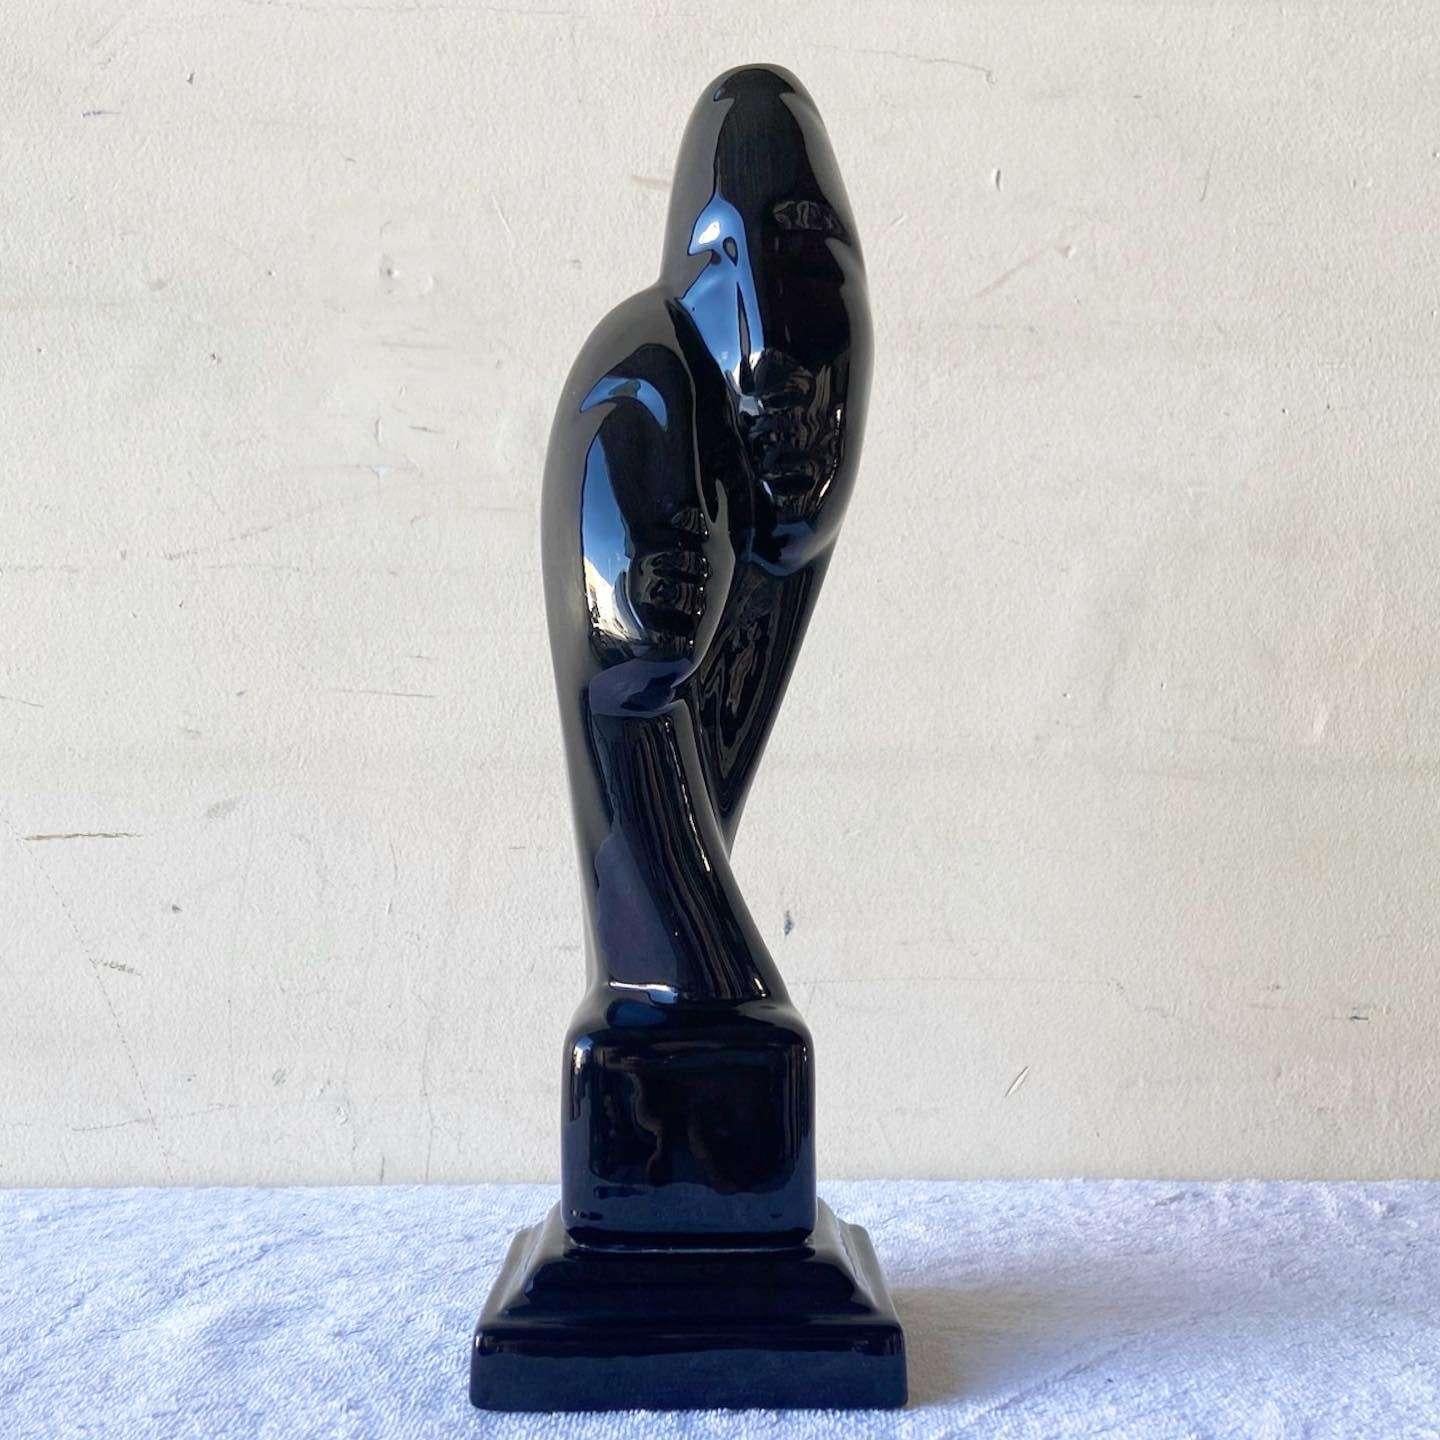 Amazing vintage postmodern ceramic sculpture. Sculpture is a two headed bust with a glossy black finish.
